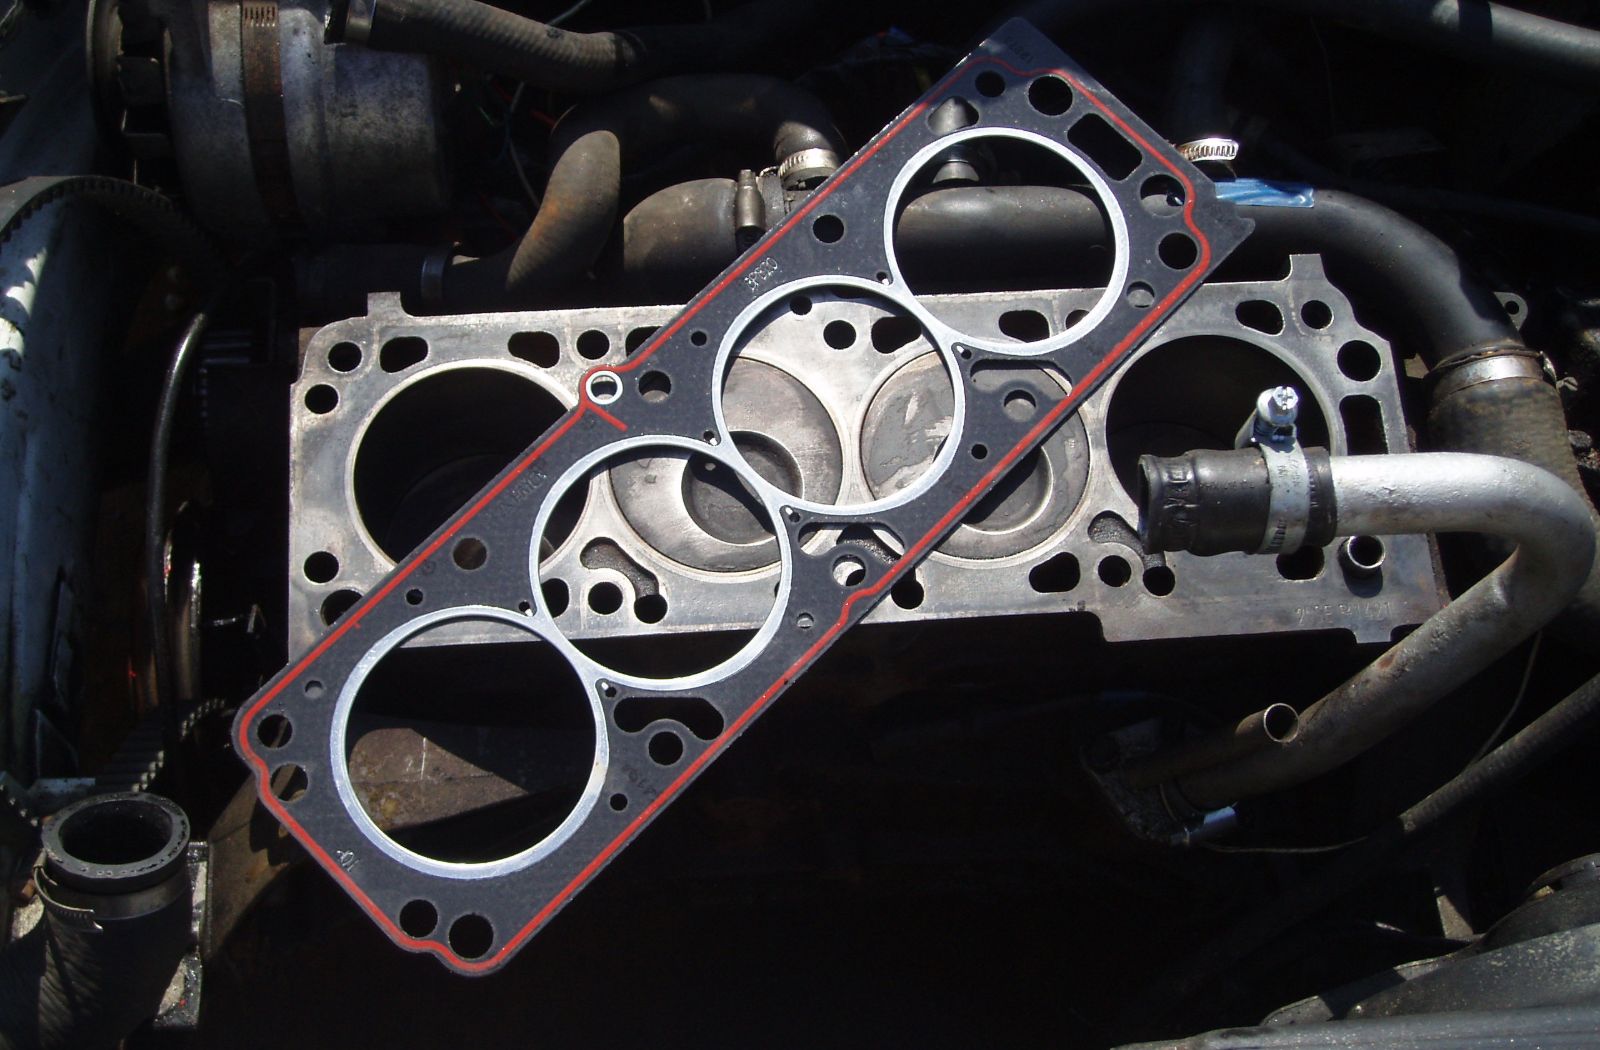 Gaskets - definition of Gaskets by The Free Dictionary